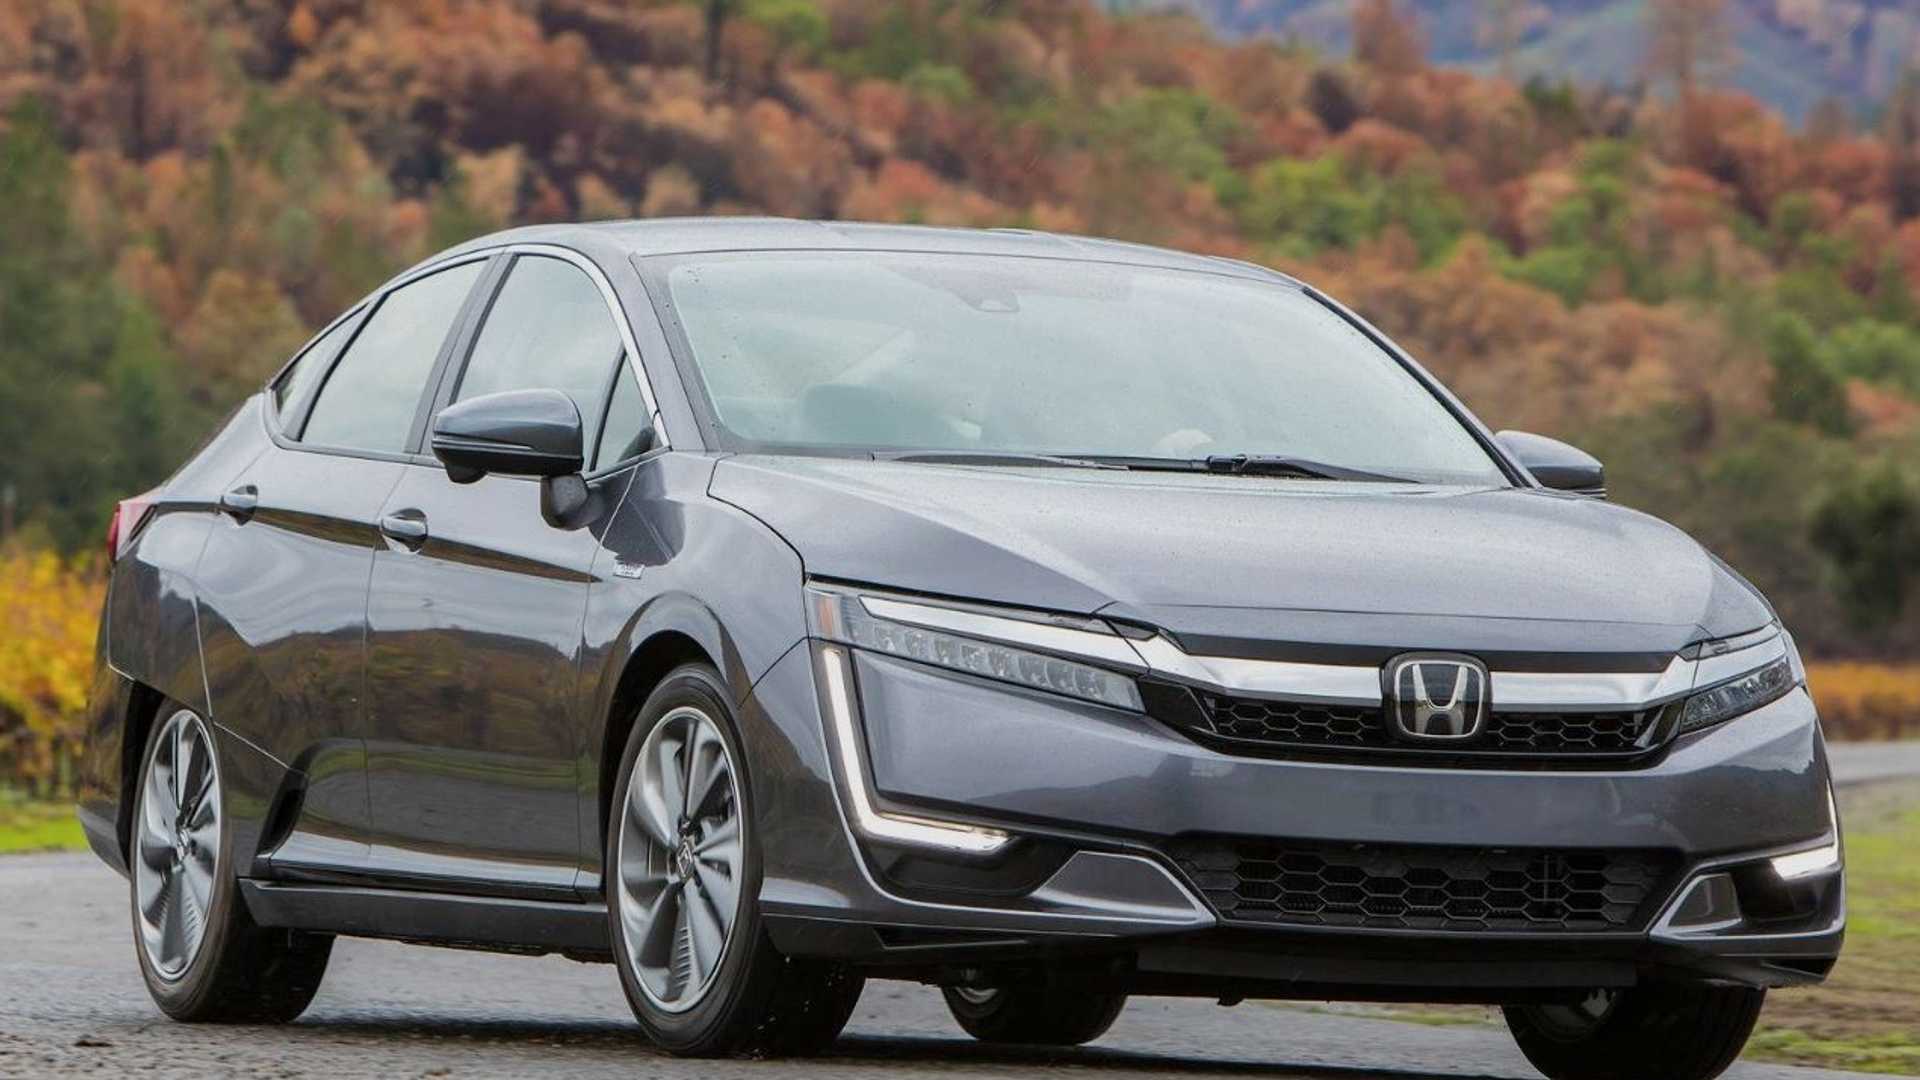 honda clarity ev is going to be discontinue in 2020